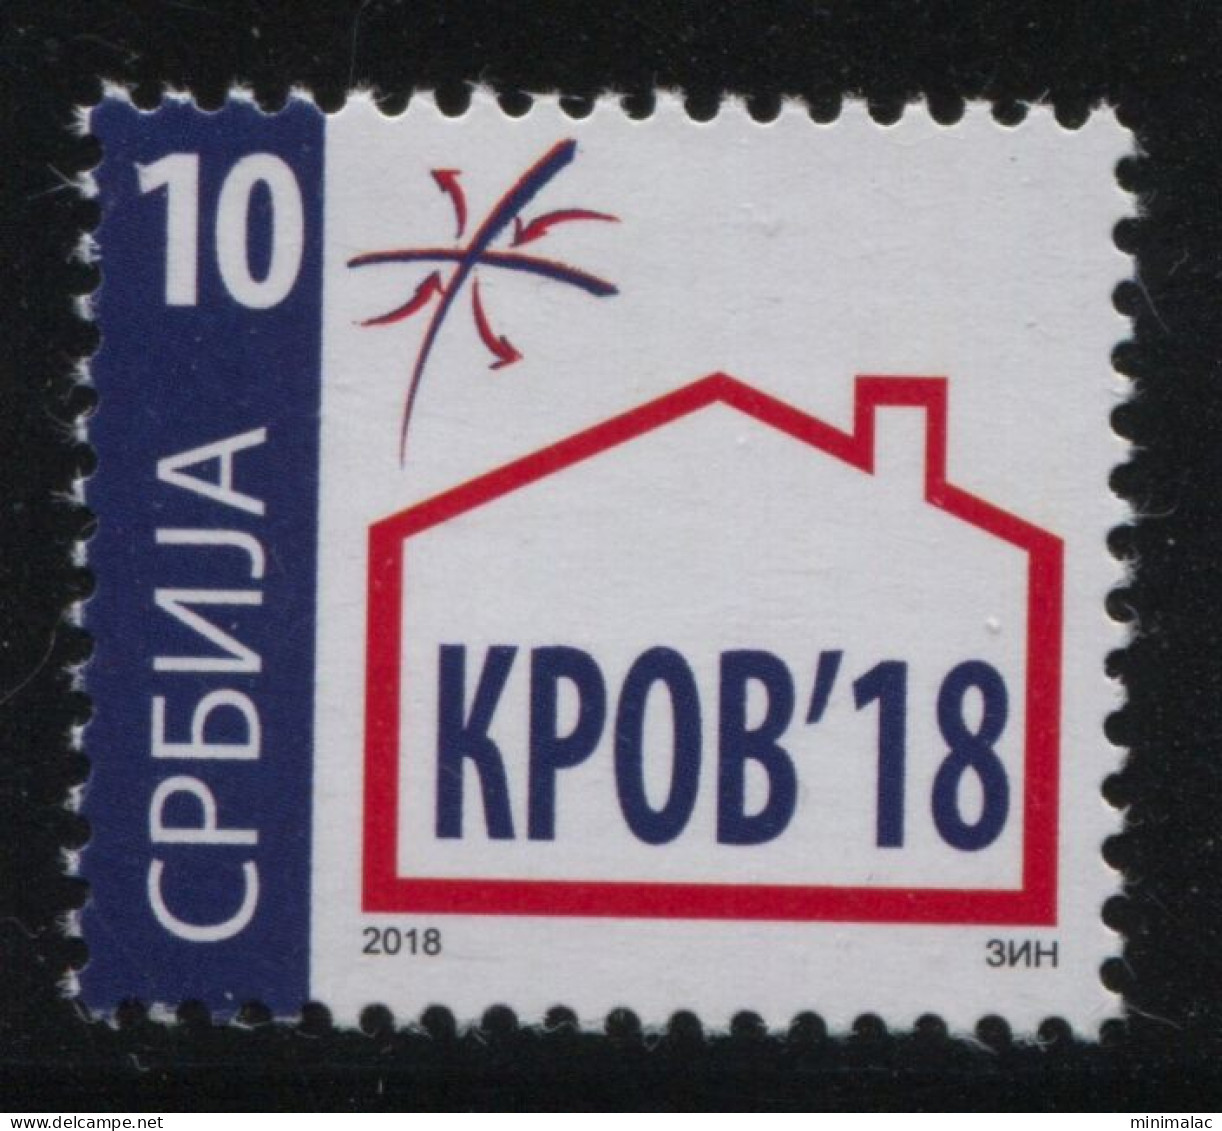 Serbia 2018, Roof For Refugees, Charity Stamp, Additional Stamp 10d, MNH - Serbia